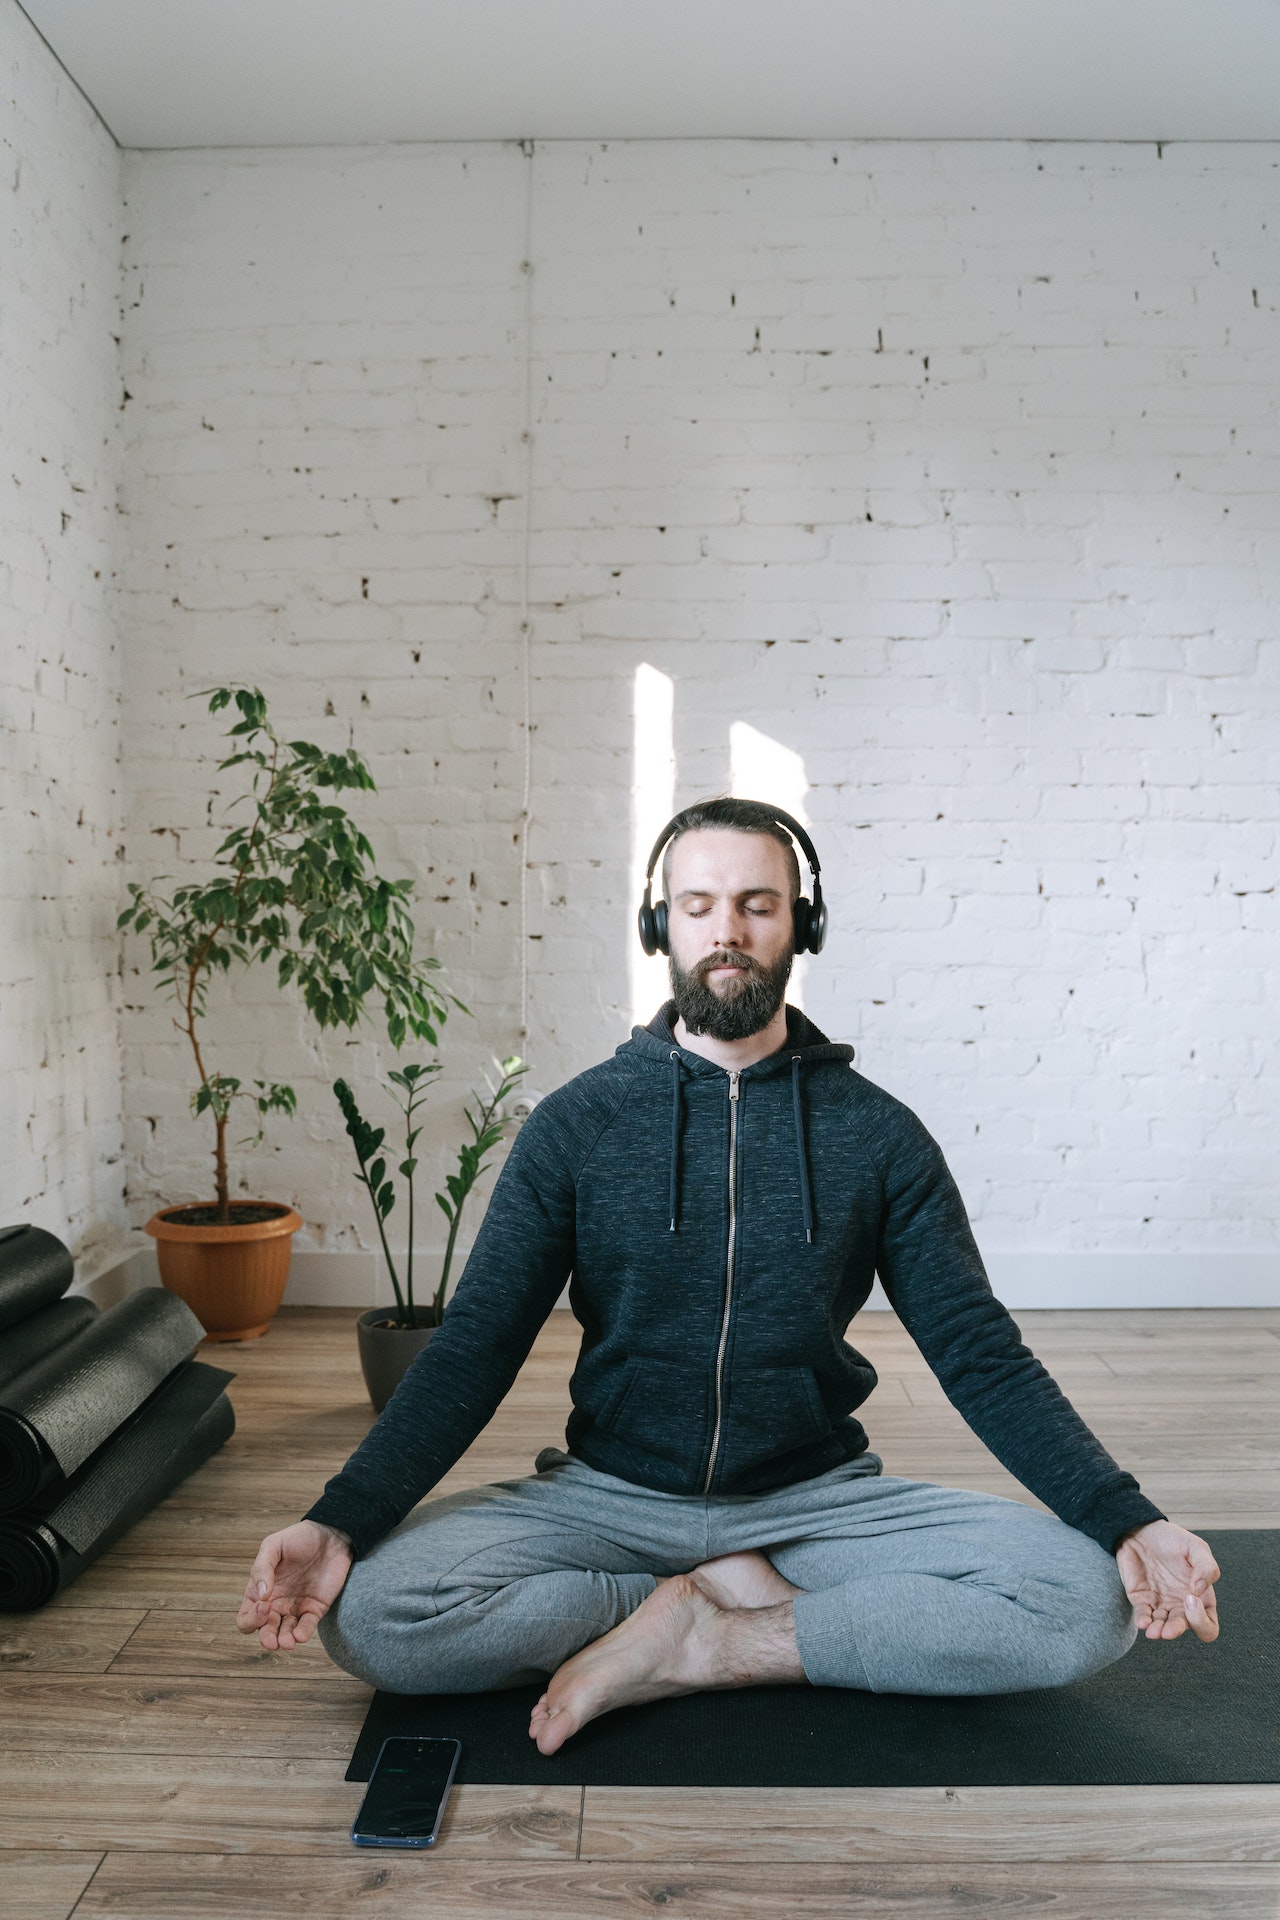 Music And Yoga For A Holistic Approach To Health And Wellness - Harmonizing Body And Soul